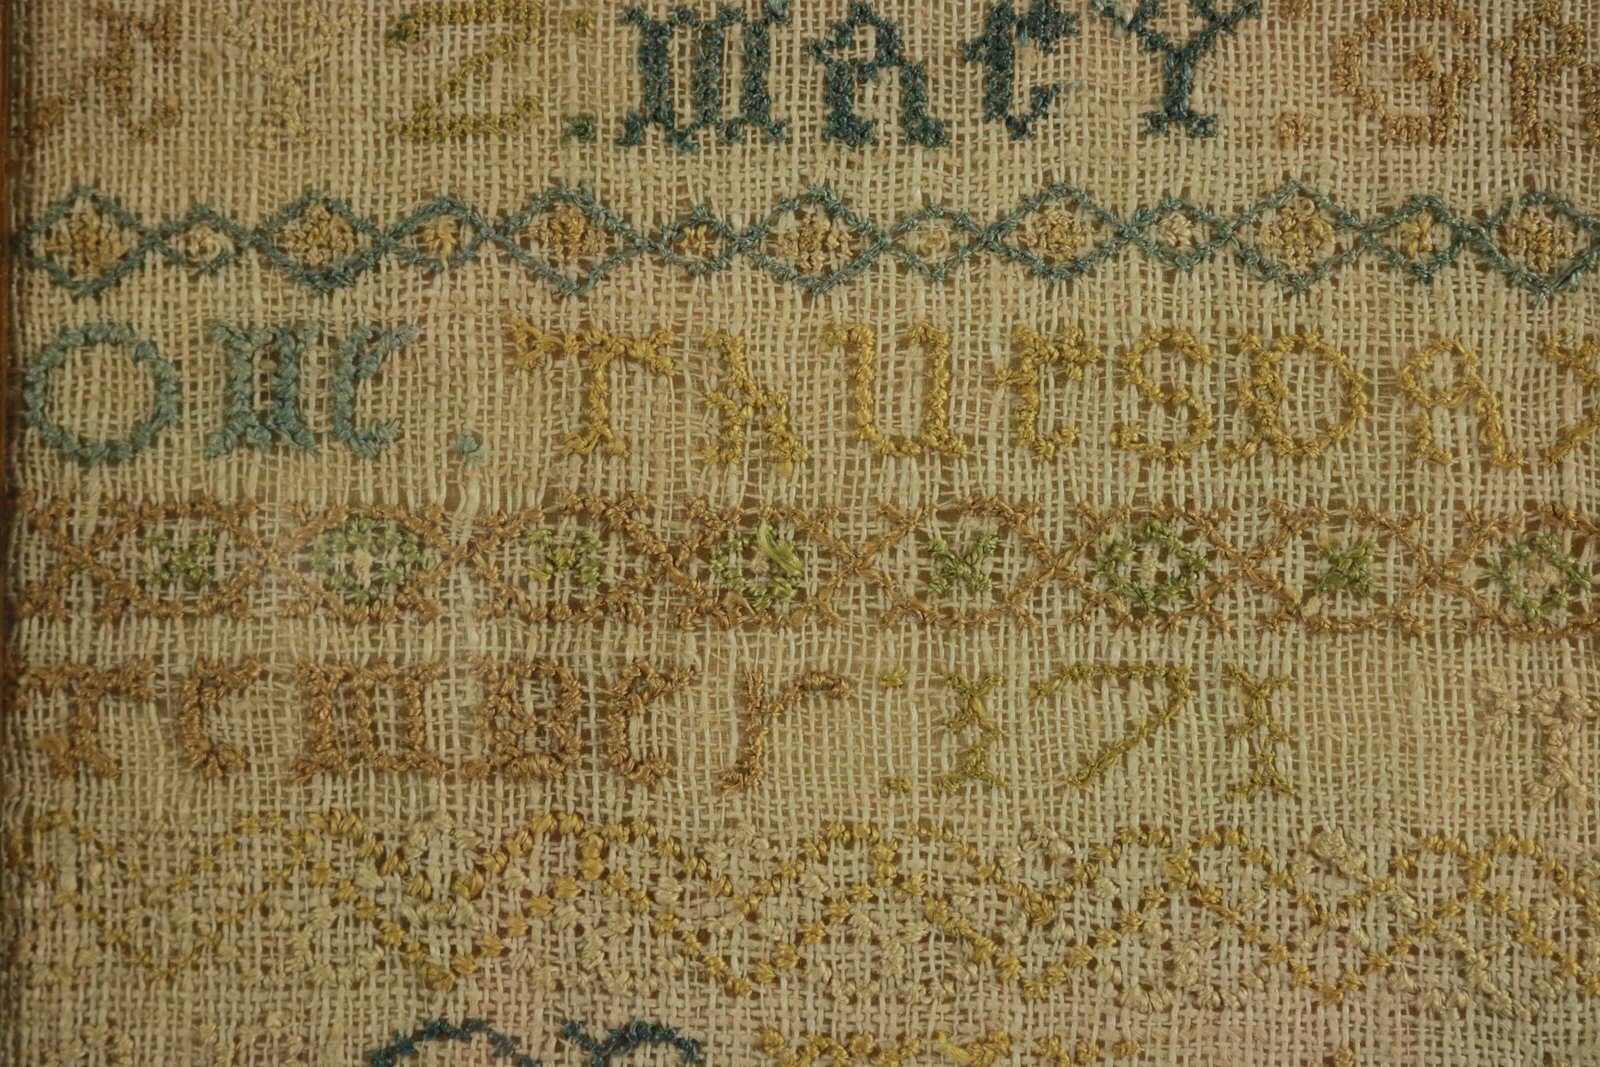 Large Antique Band Sampler, c.1725, by Mary Gatehouse For Sale 3